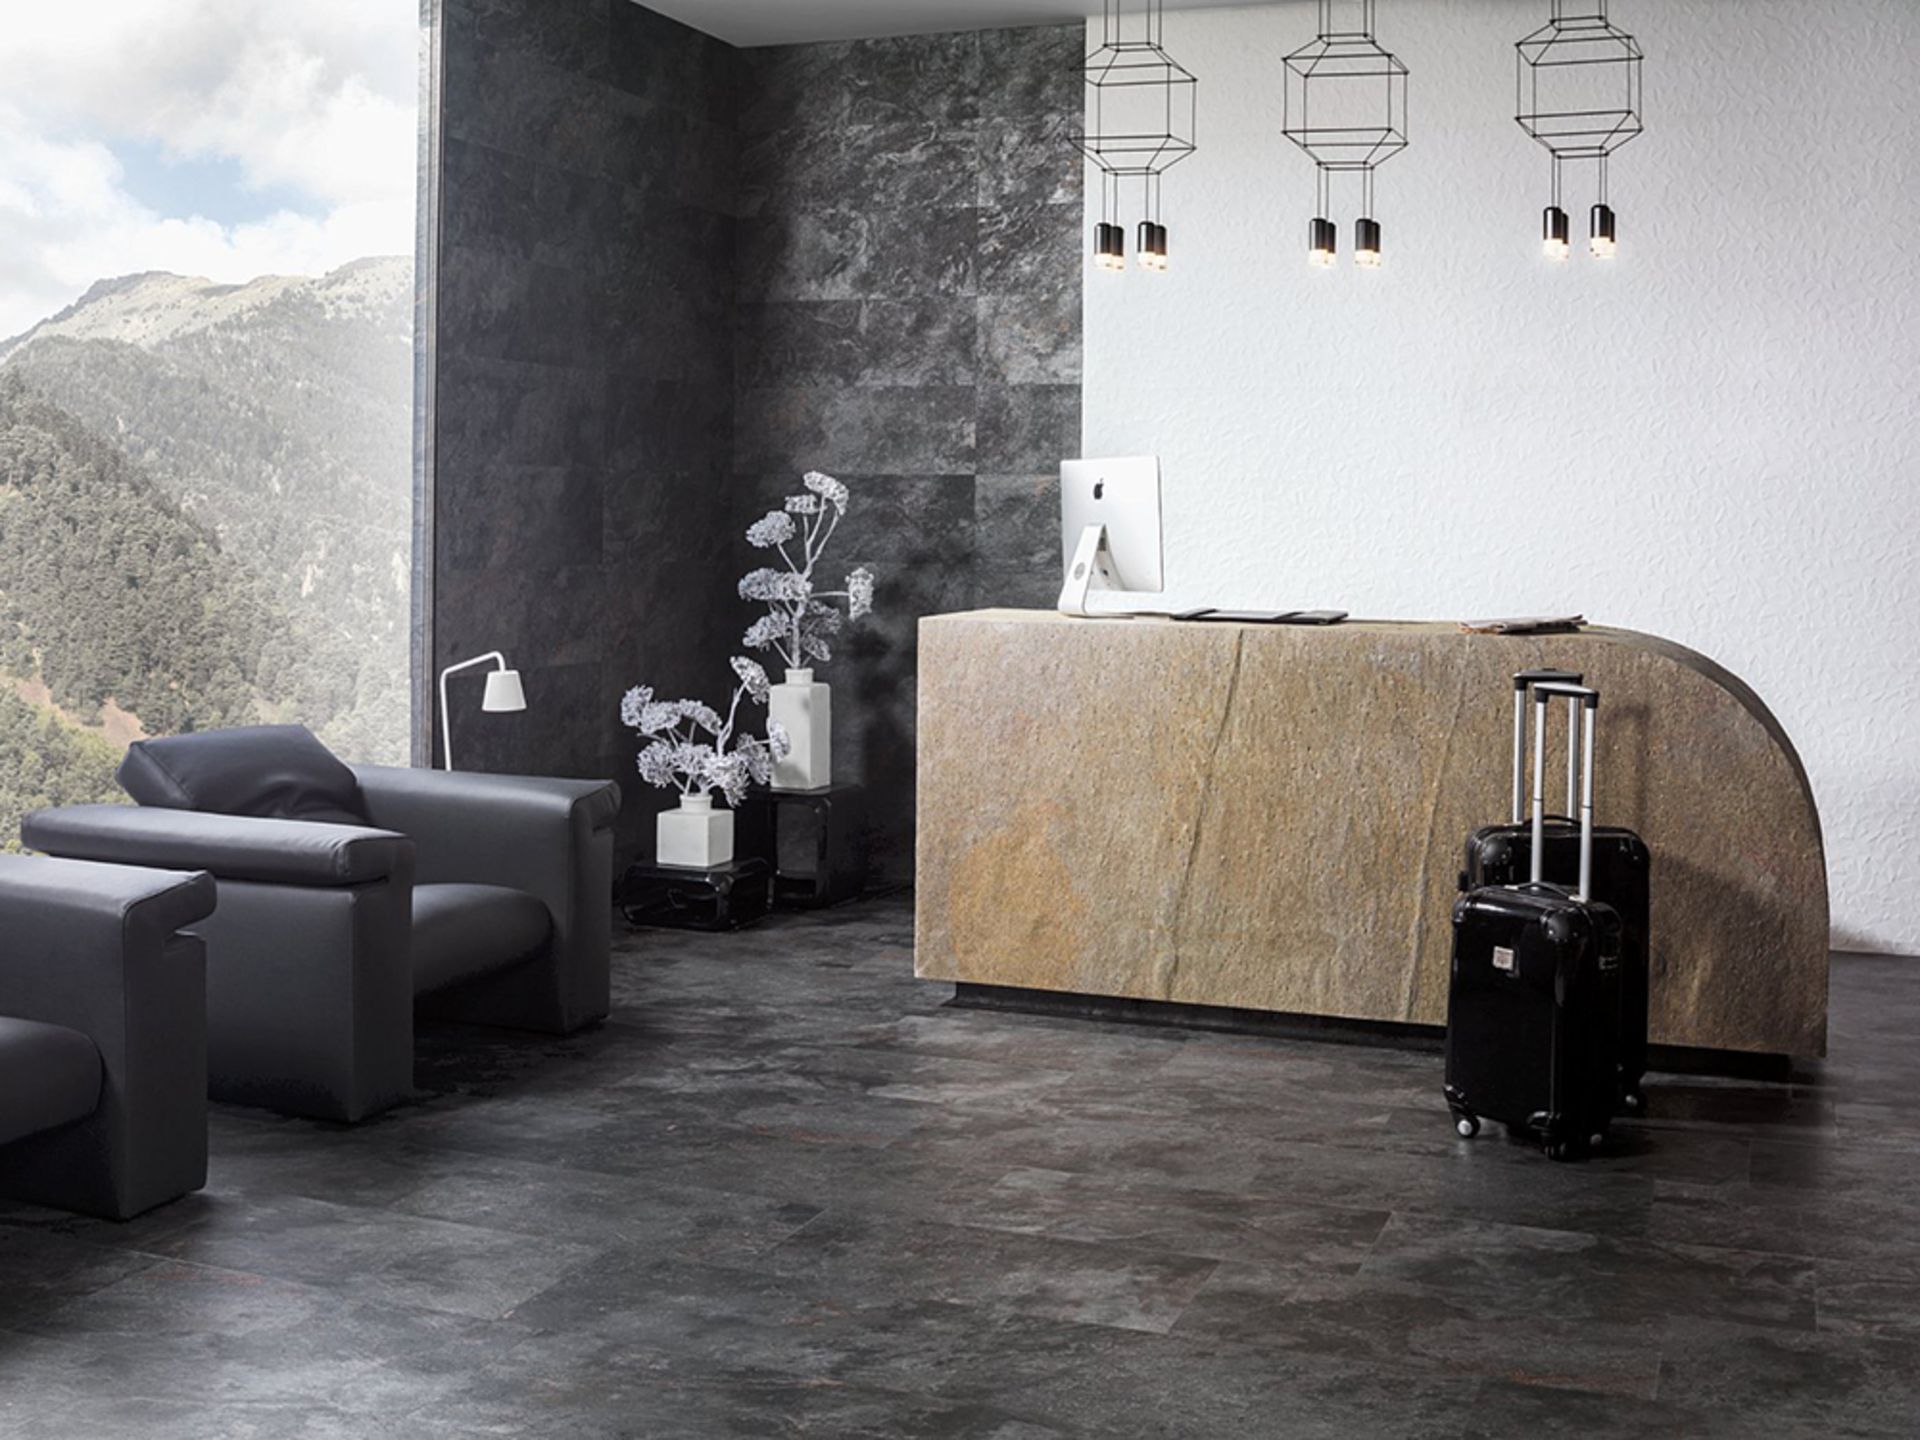 10.01 Square Meters of Porcelanosa Mirage Dark Wall and Floor Tiles. 59.6x120cm per tile. The images